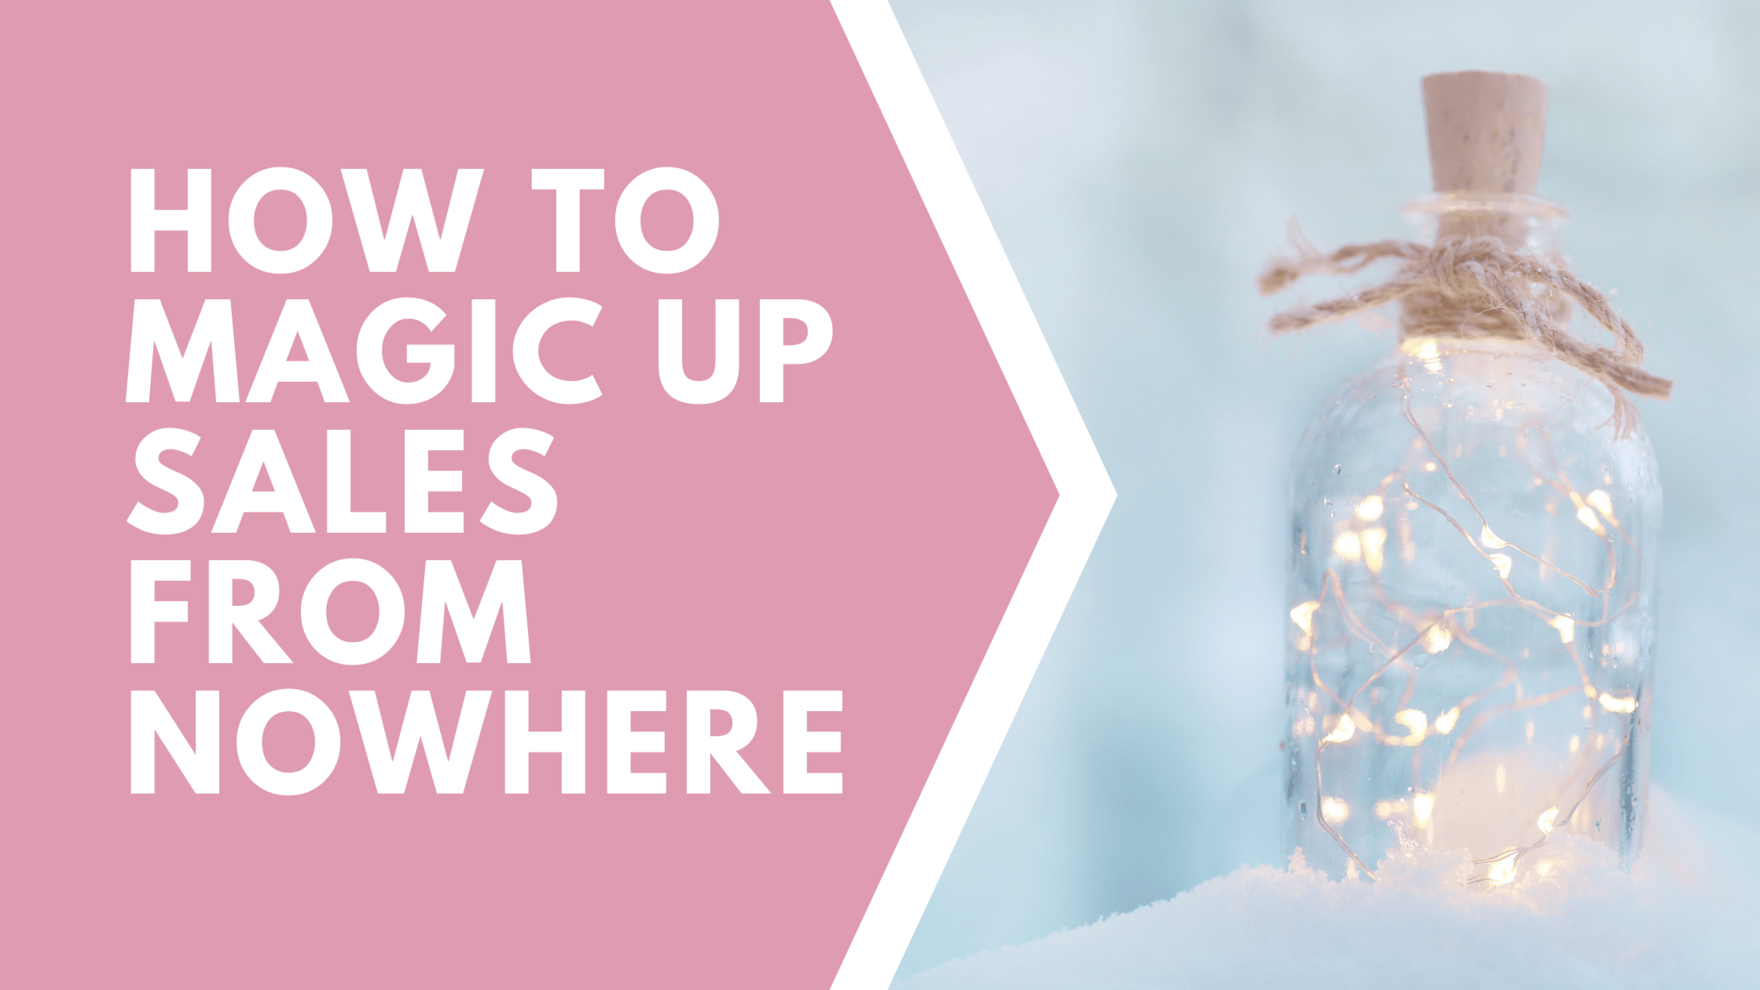 HOW TO MAGIC UP SALES FROM NOWHERE